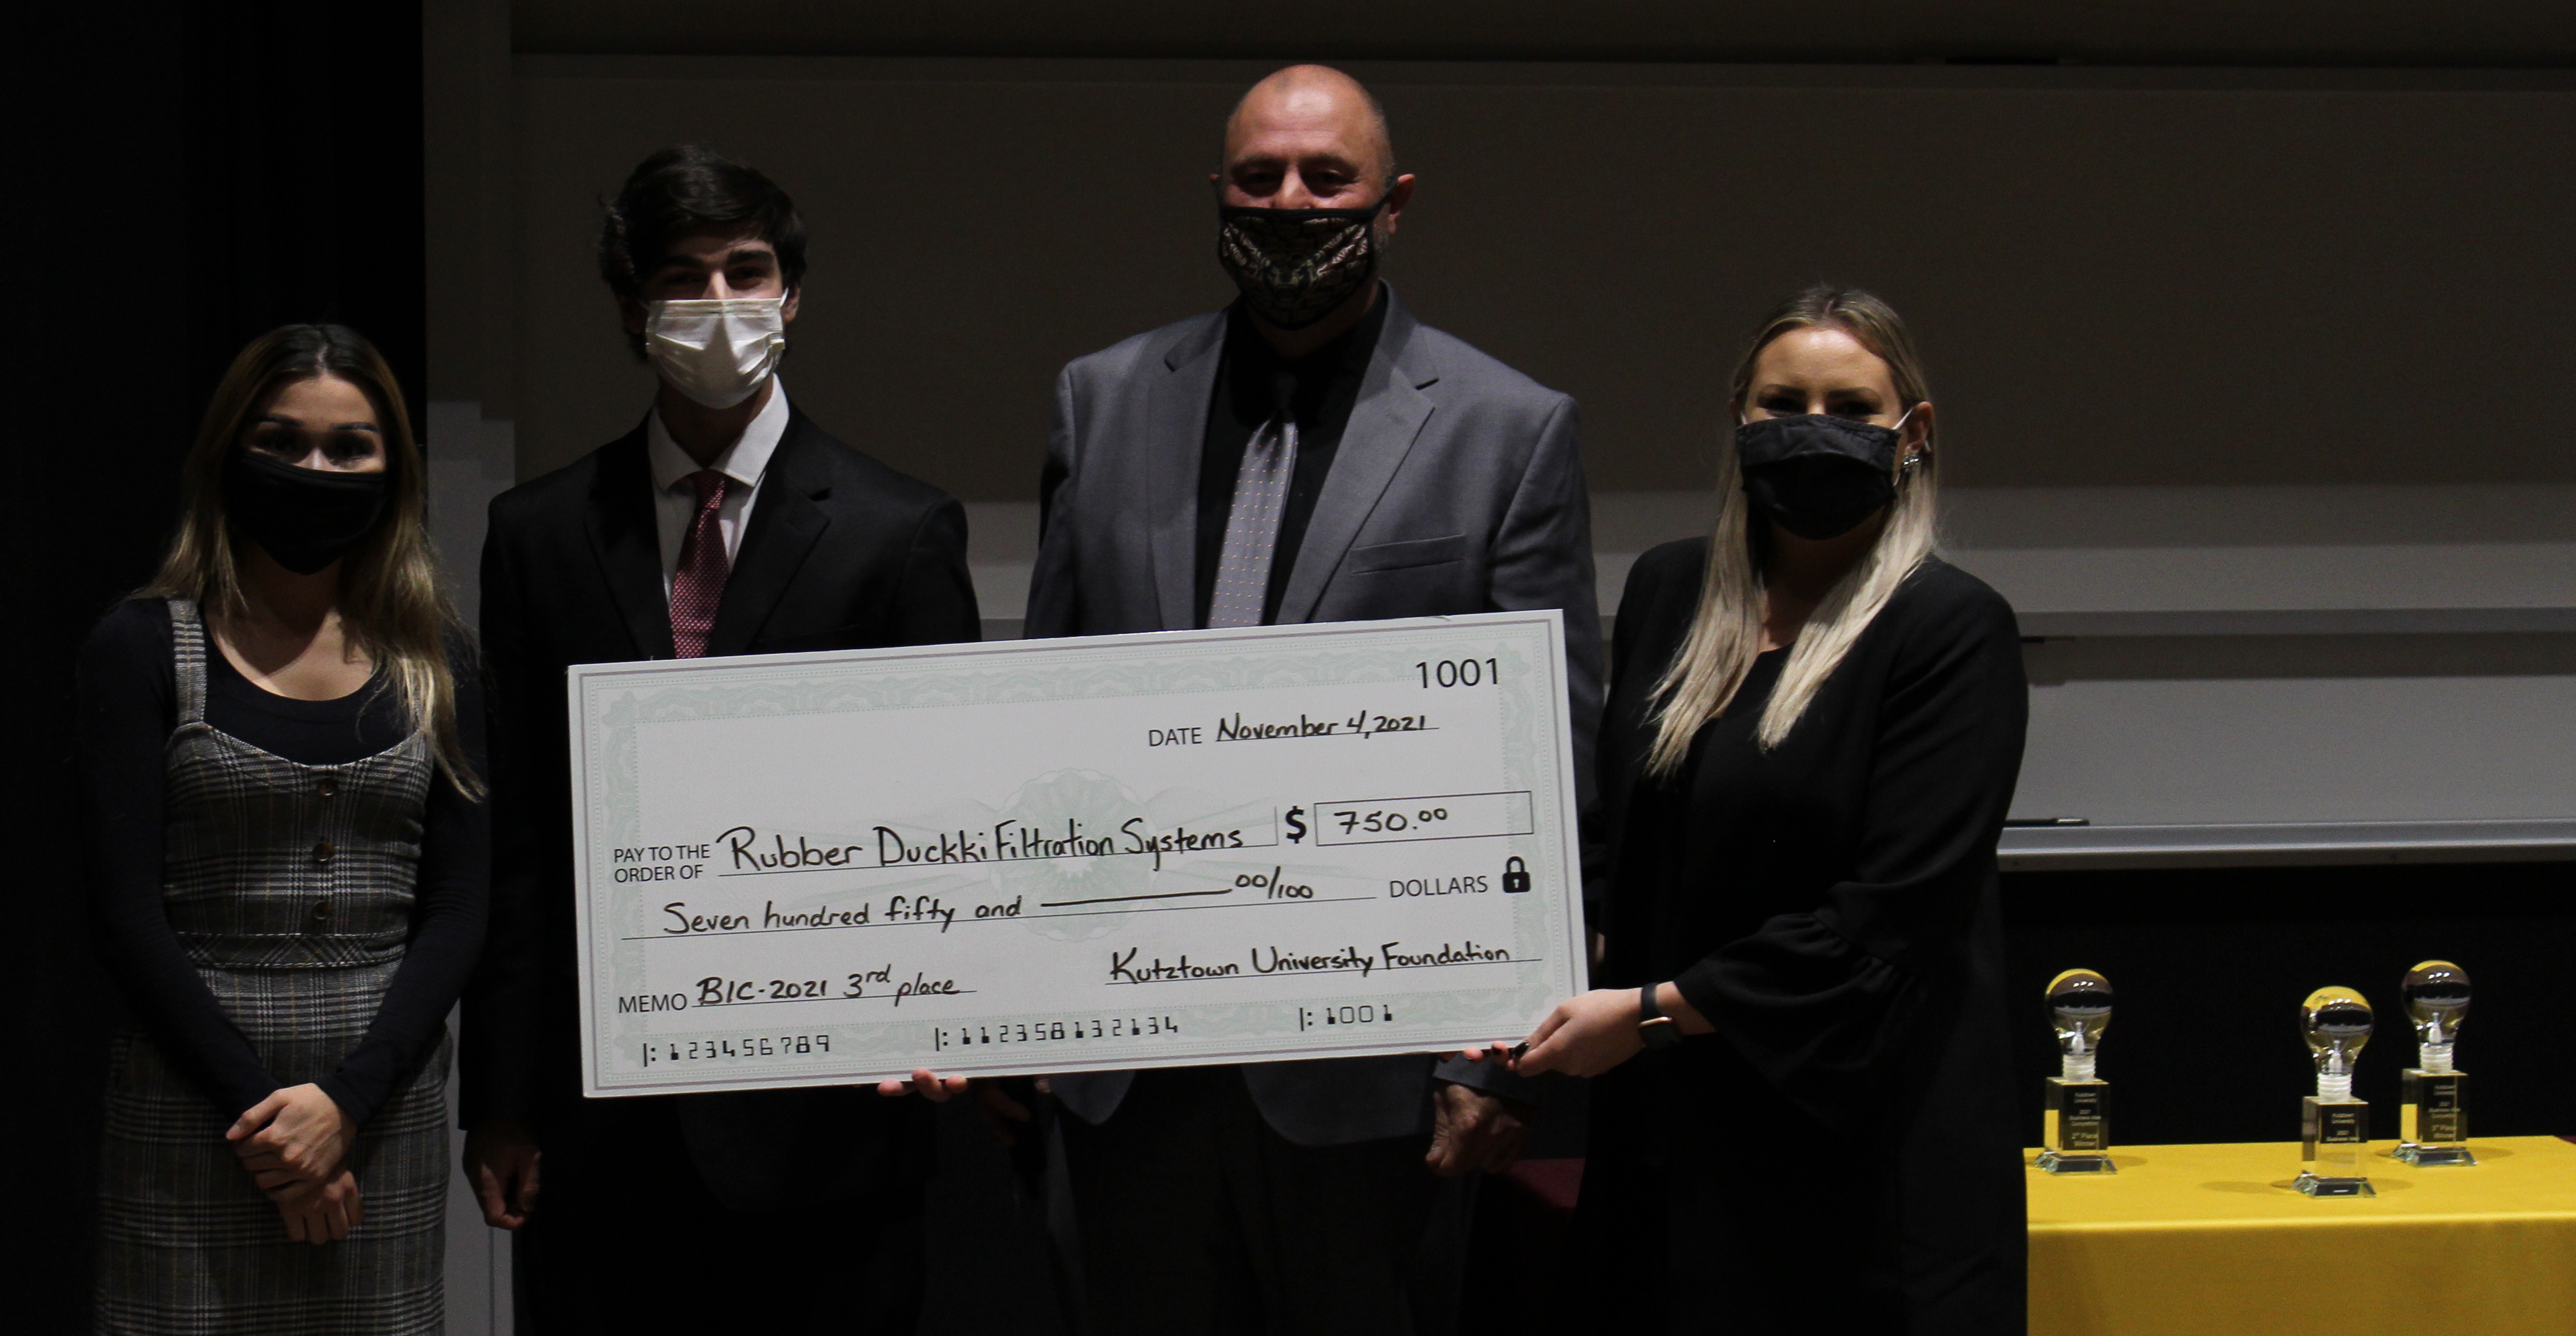 Matthew Sodano, third place winner, holding up a large check for $750 with the awarding judges.